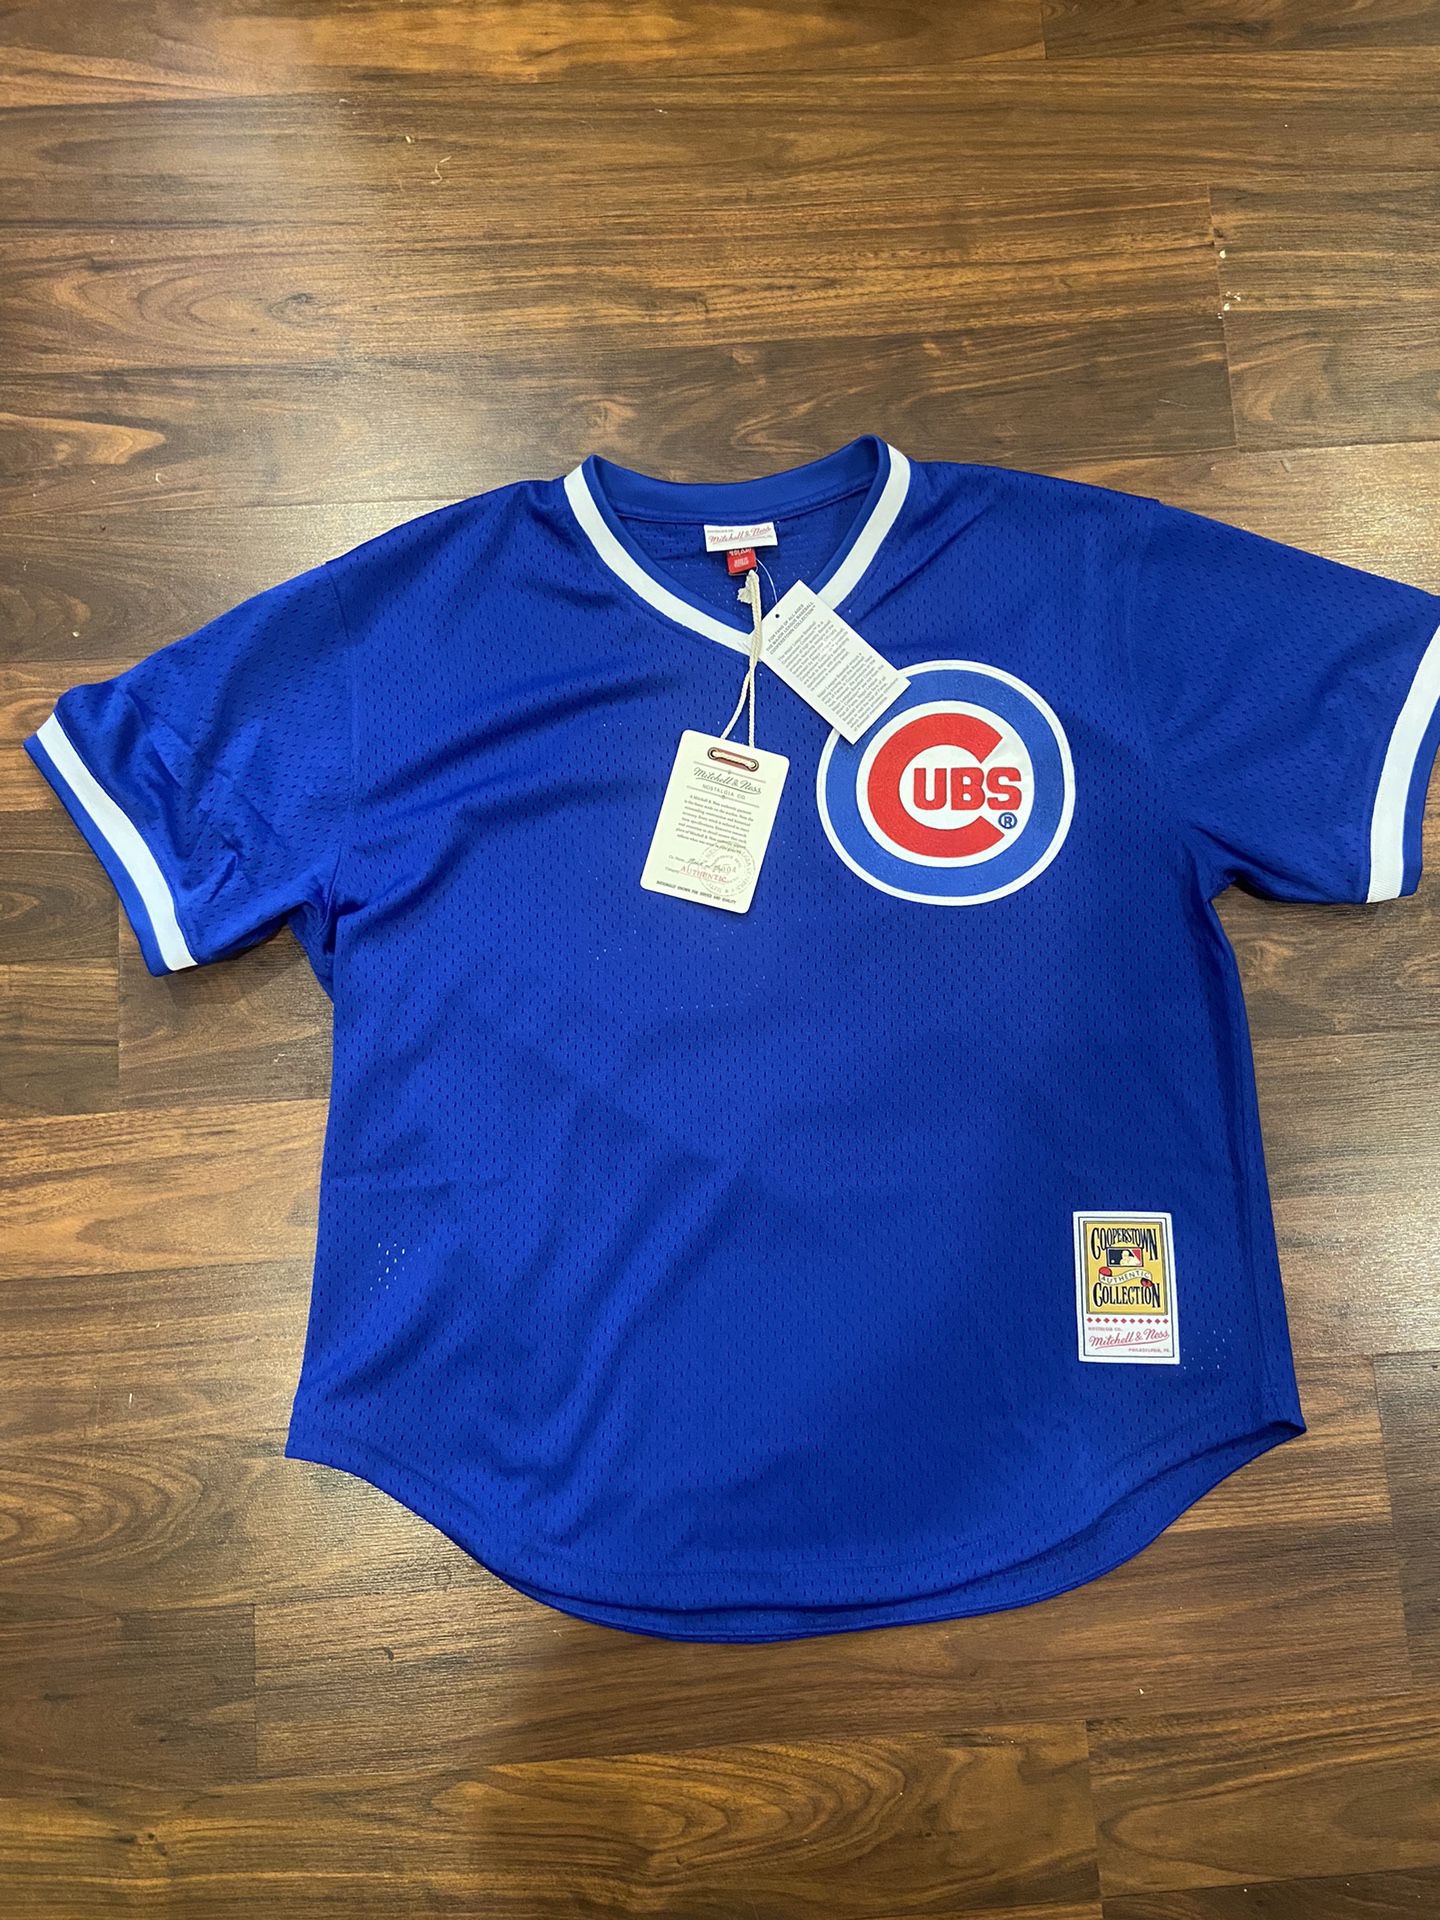 Authentic Mitchell & Ness Chicago Cubs #23 Baseball Jersey New